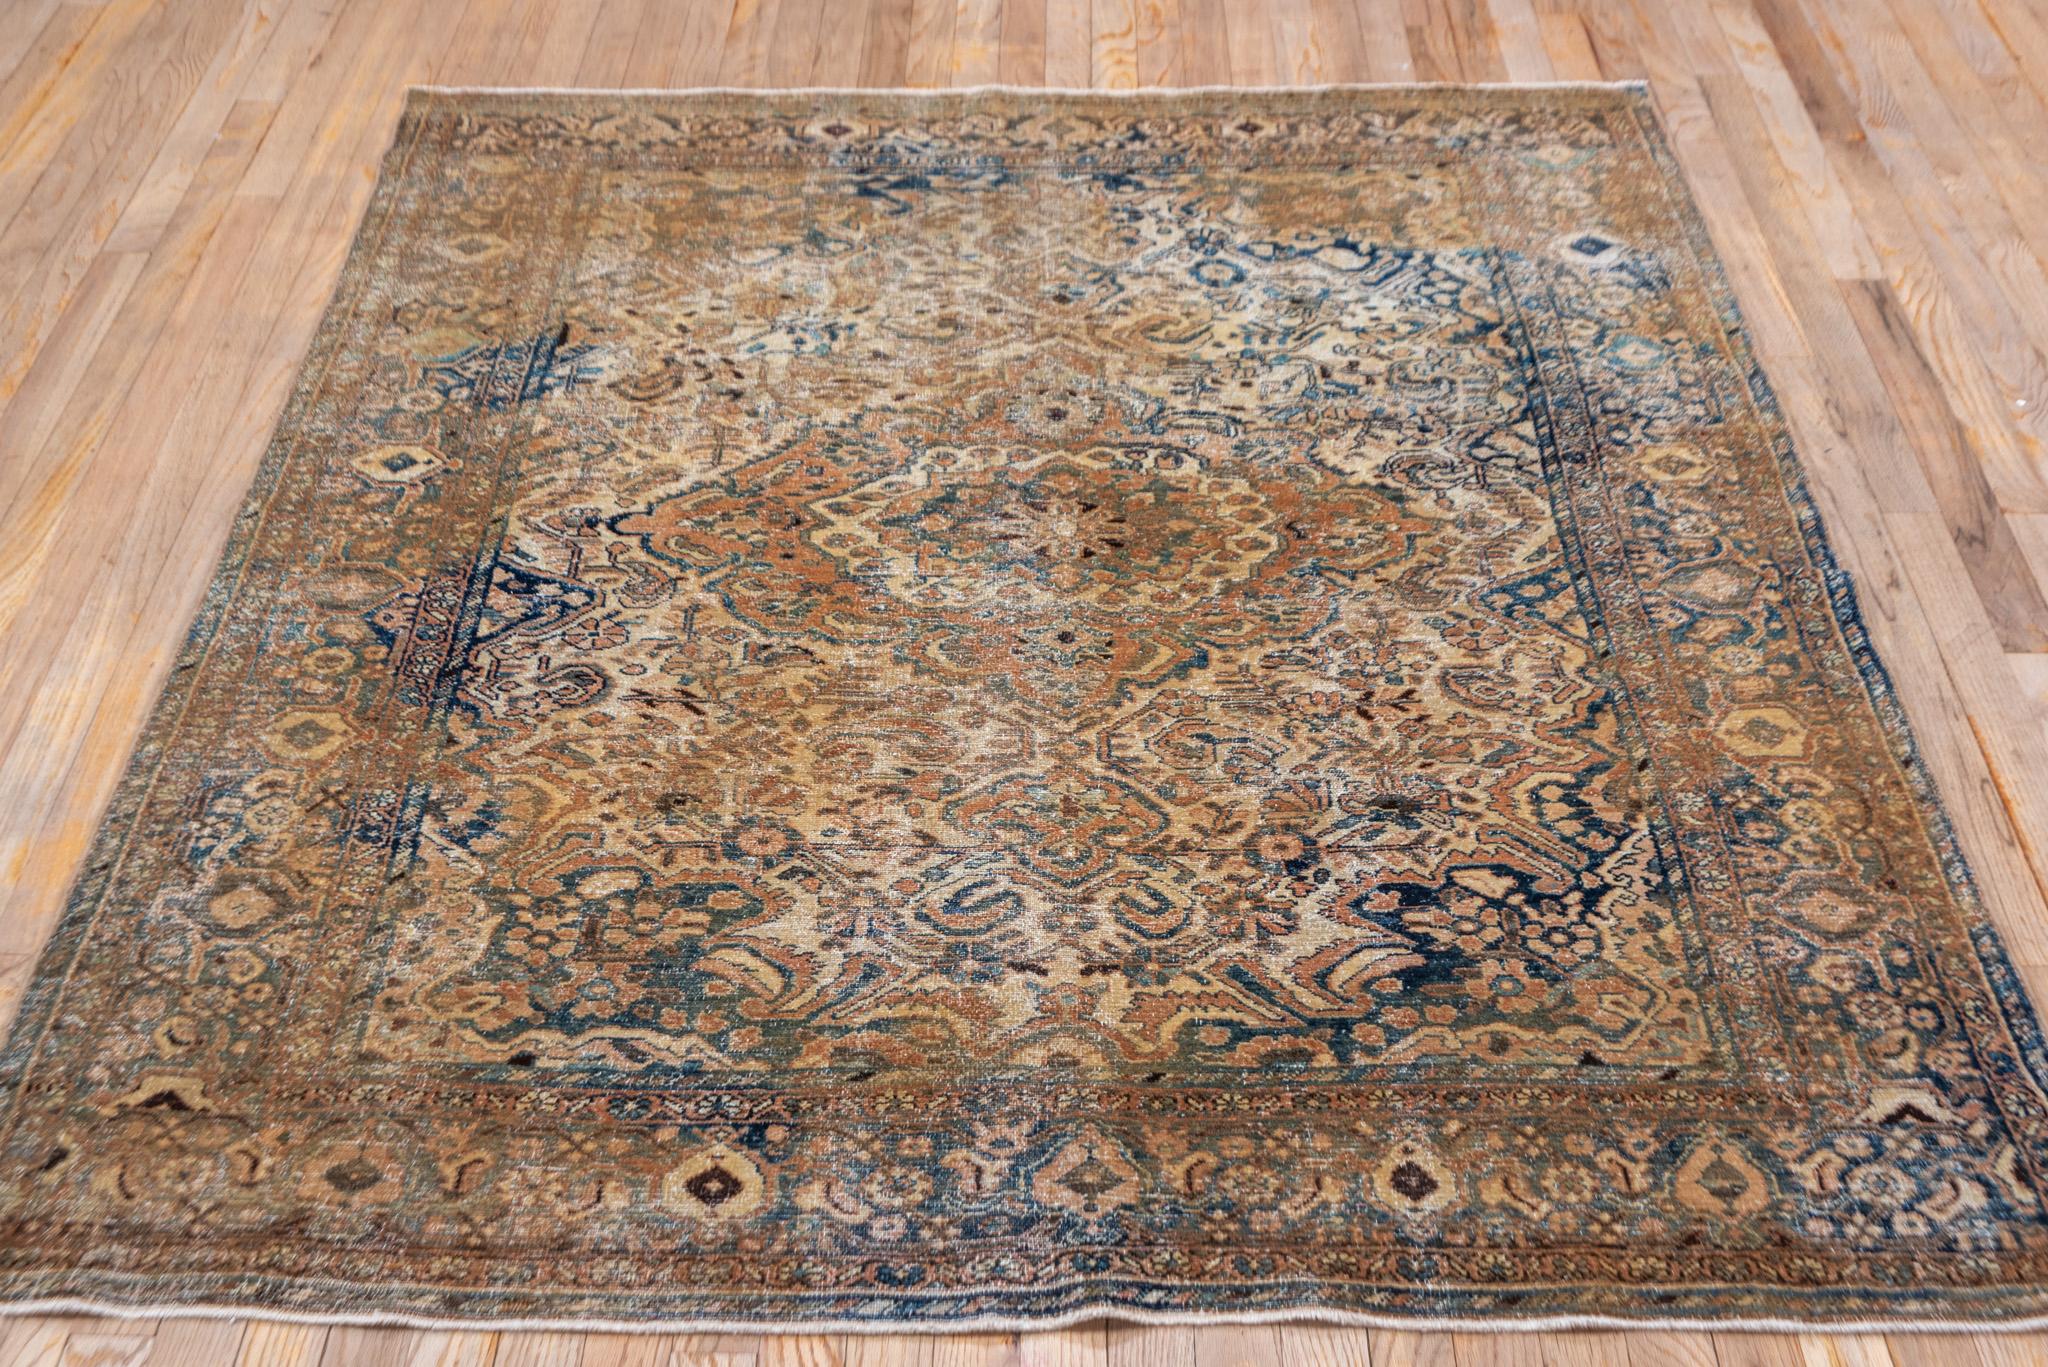 A Sivas Rug circa 1930. Hand Knotted and made of 100% wool yarn.